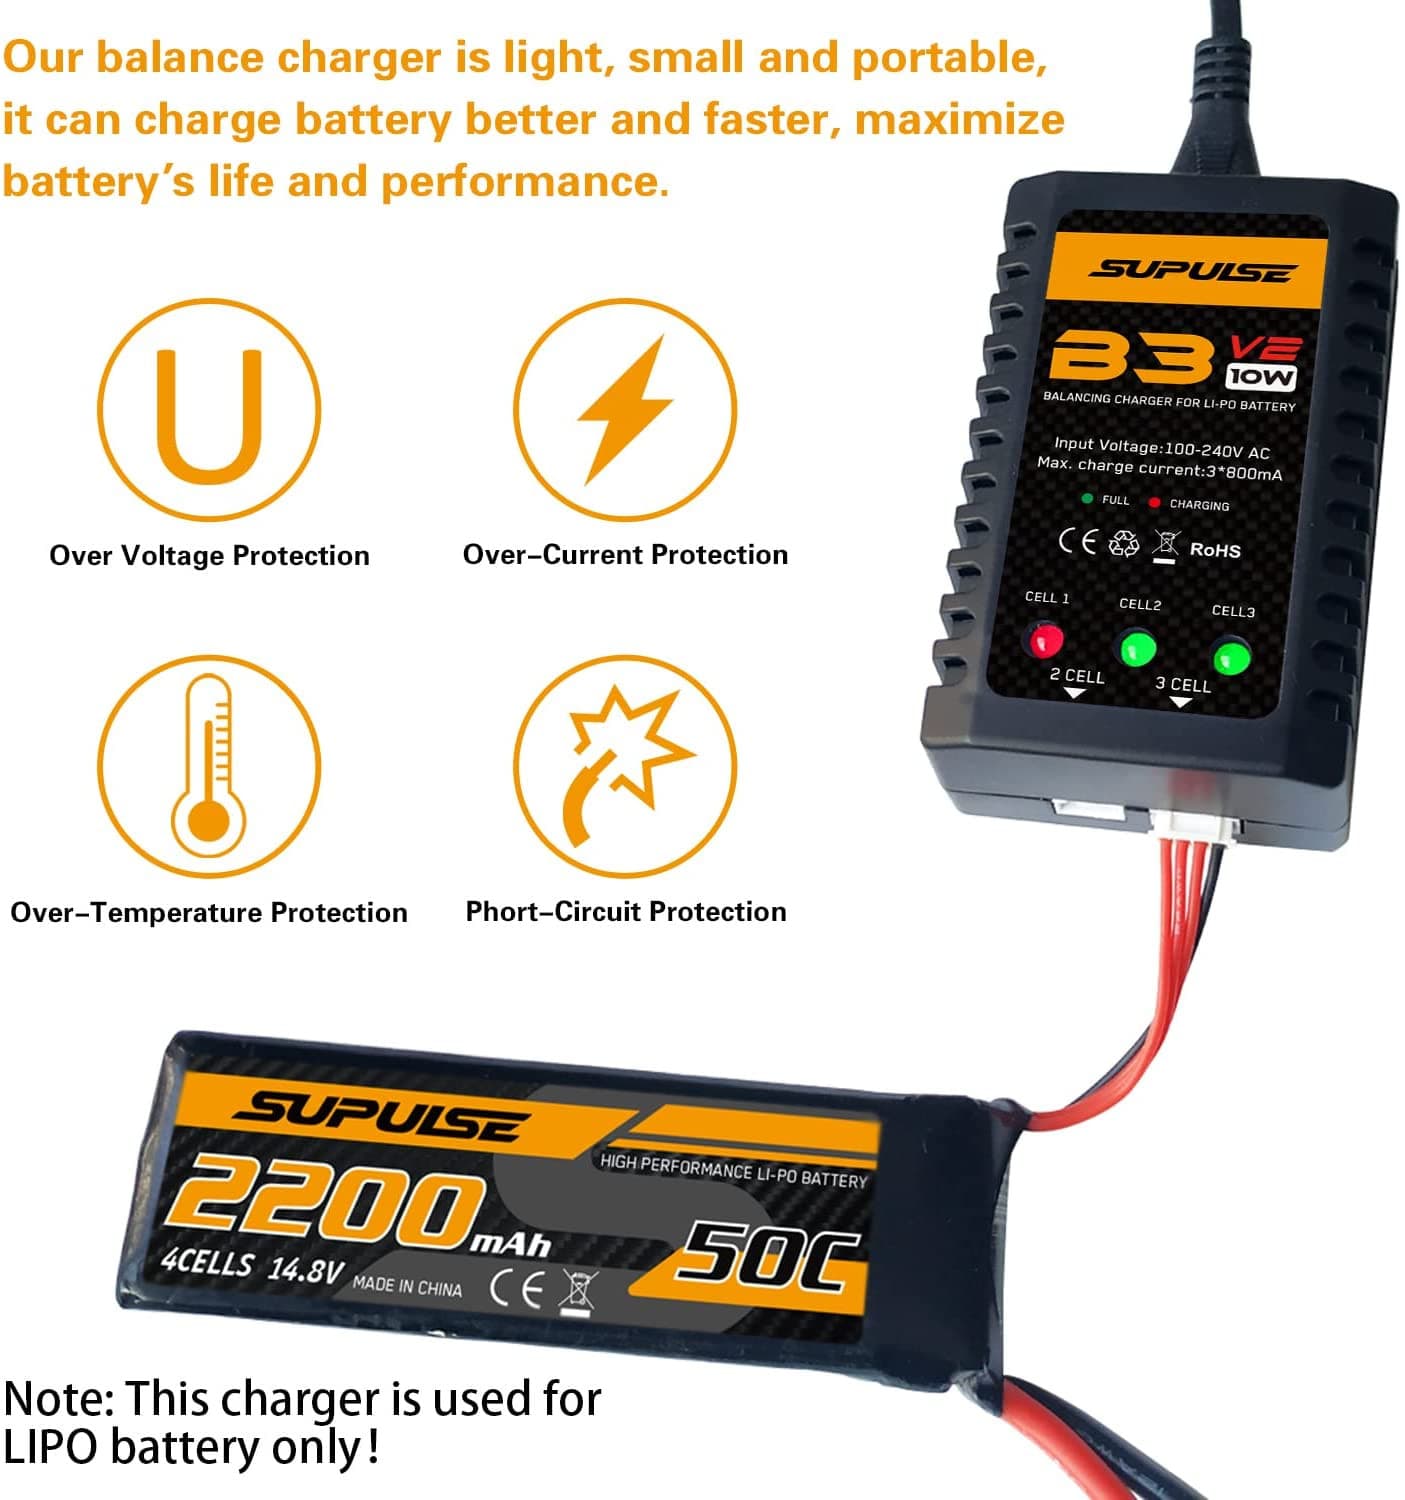 LiPo Charger RC Car Charger Dual Port Balance Charger Discharger